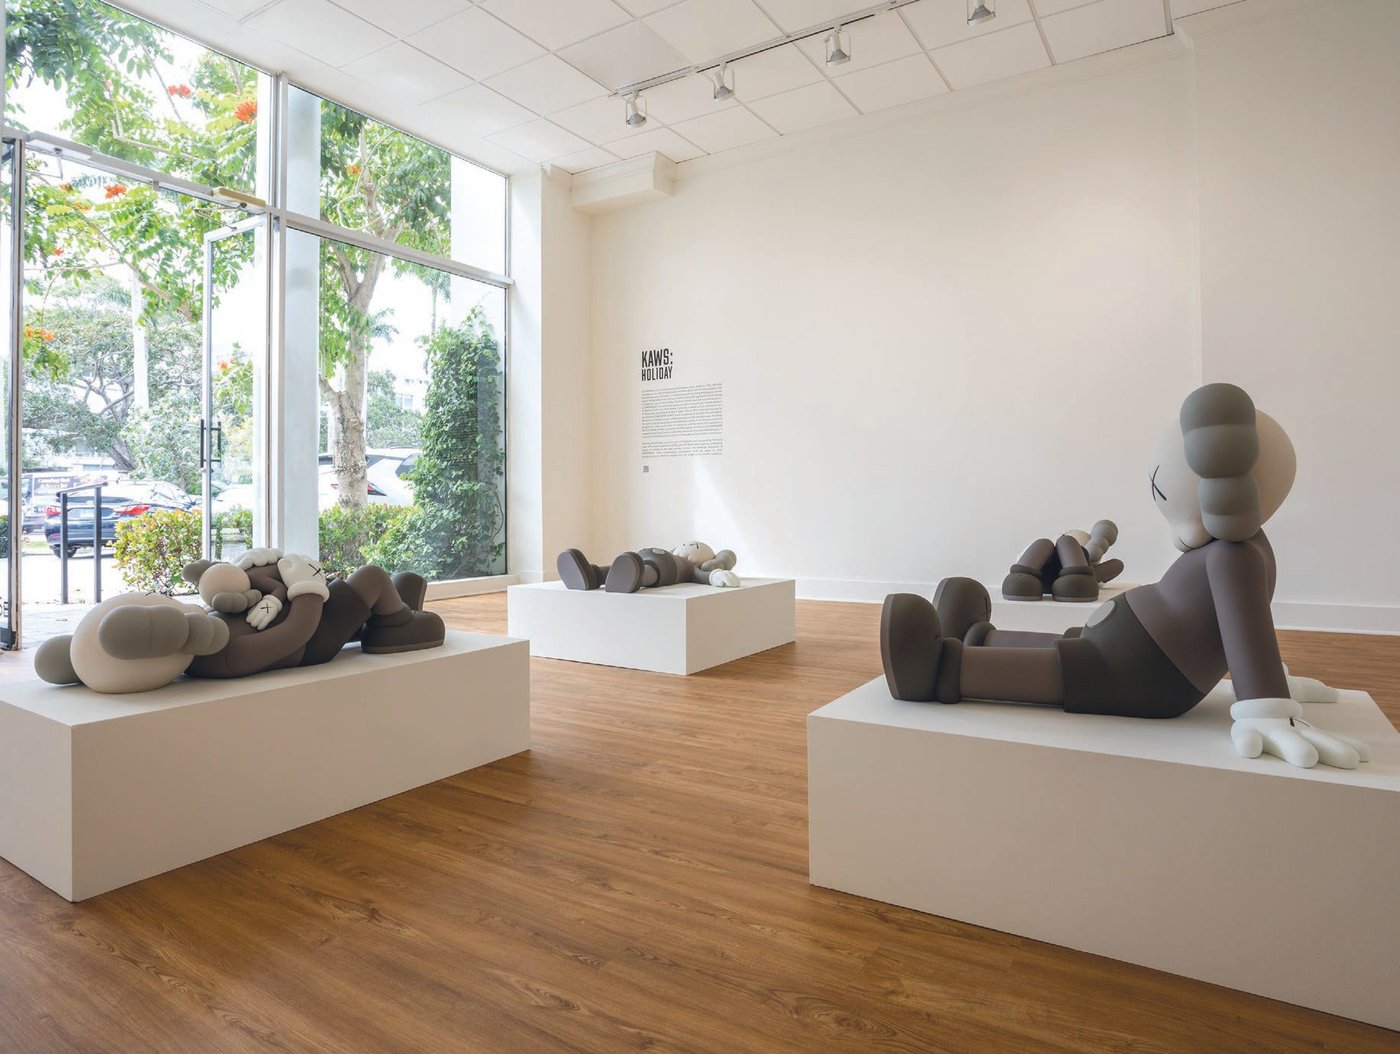 Skarstedt Gallery is popping up in Palm Beach through June 15, beginning with KAWS: HOLIDAY. PHOTO BY ORIOL TARRIDAS